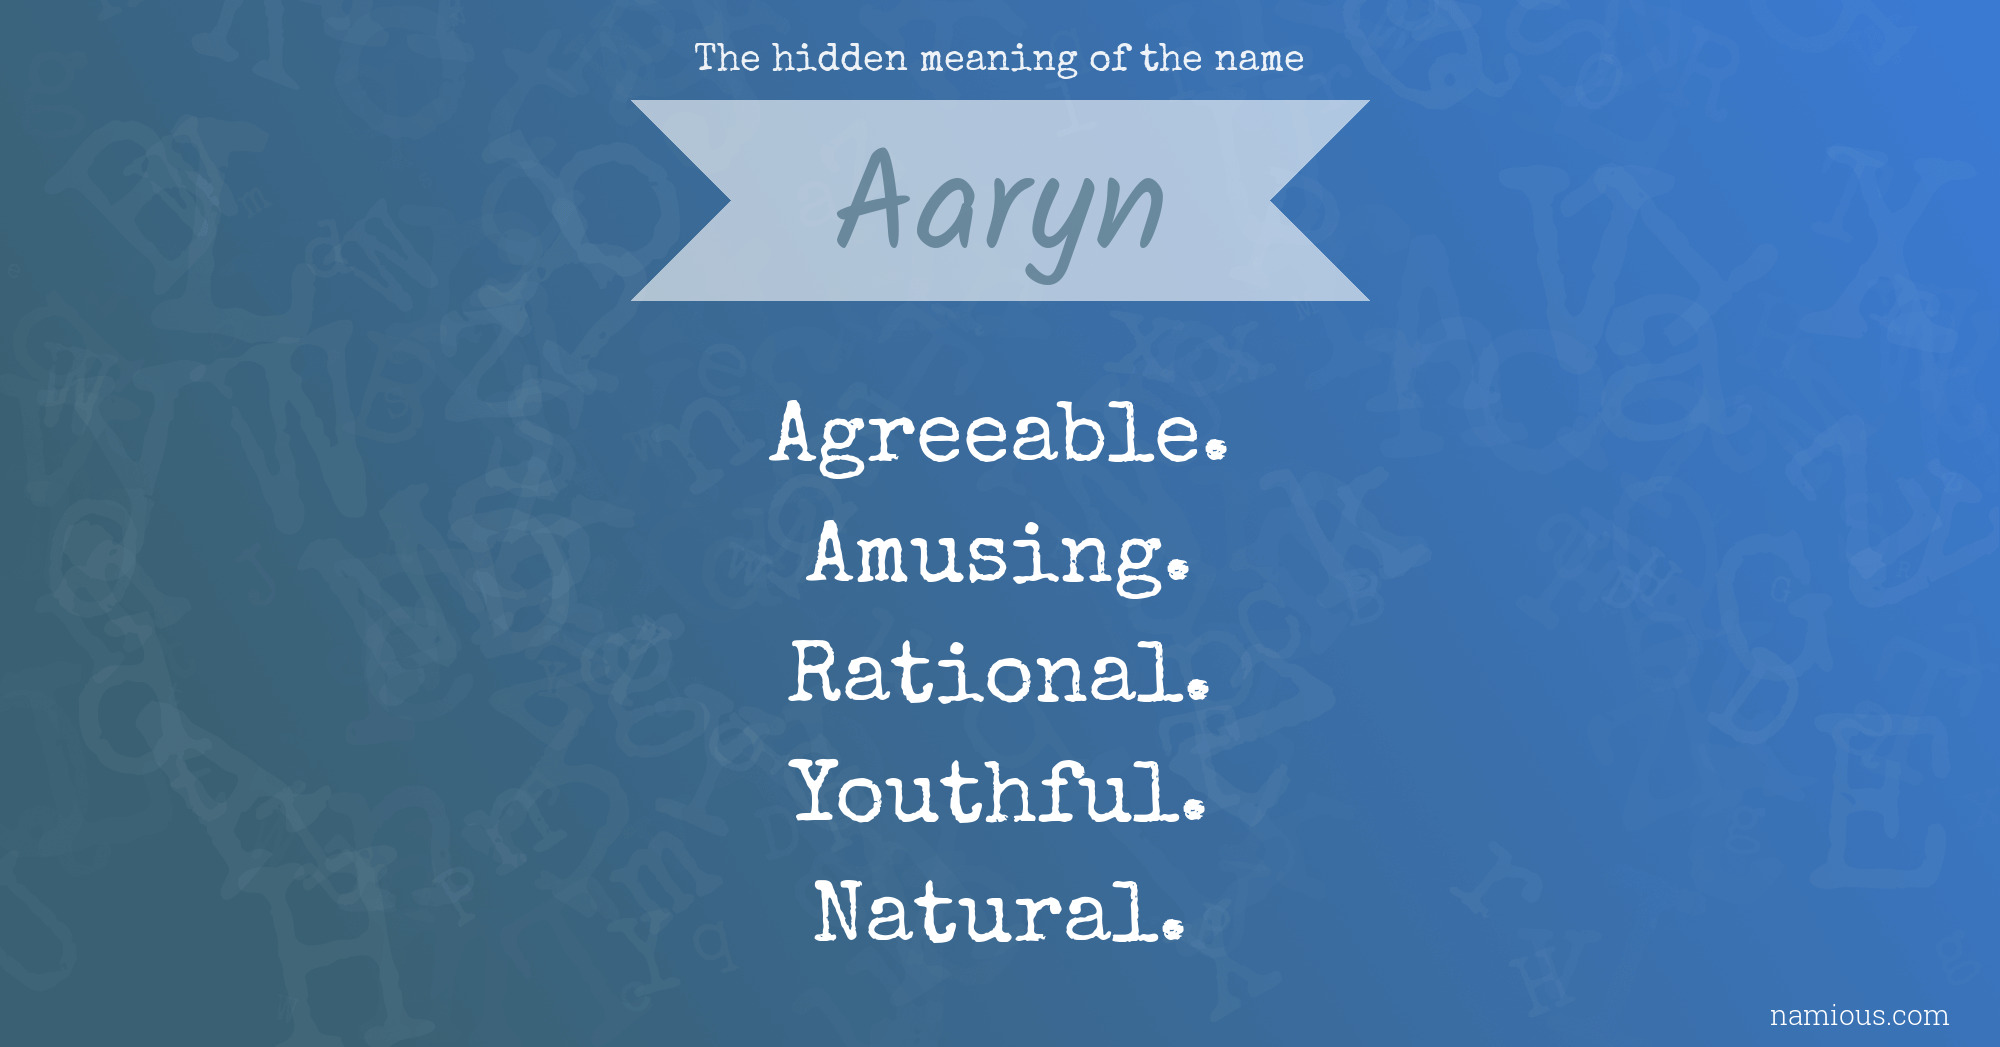 The hidden meaning of the name Aaryn